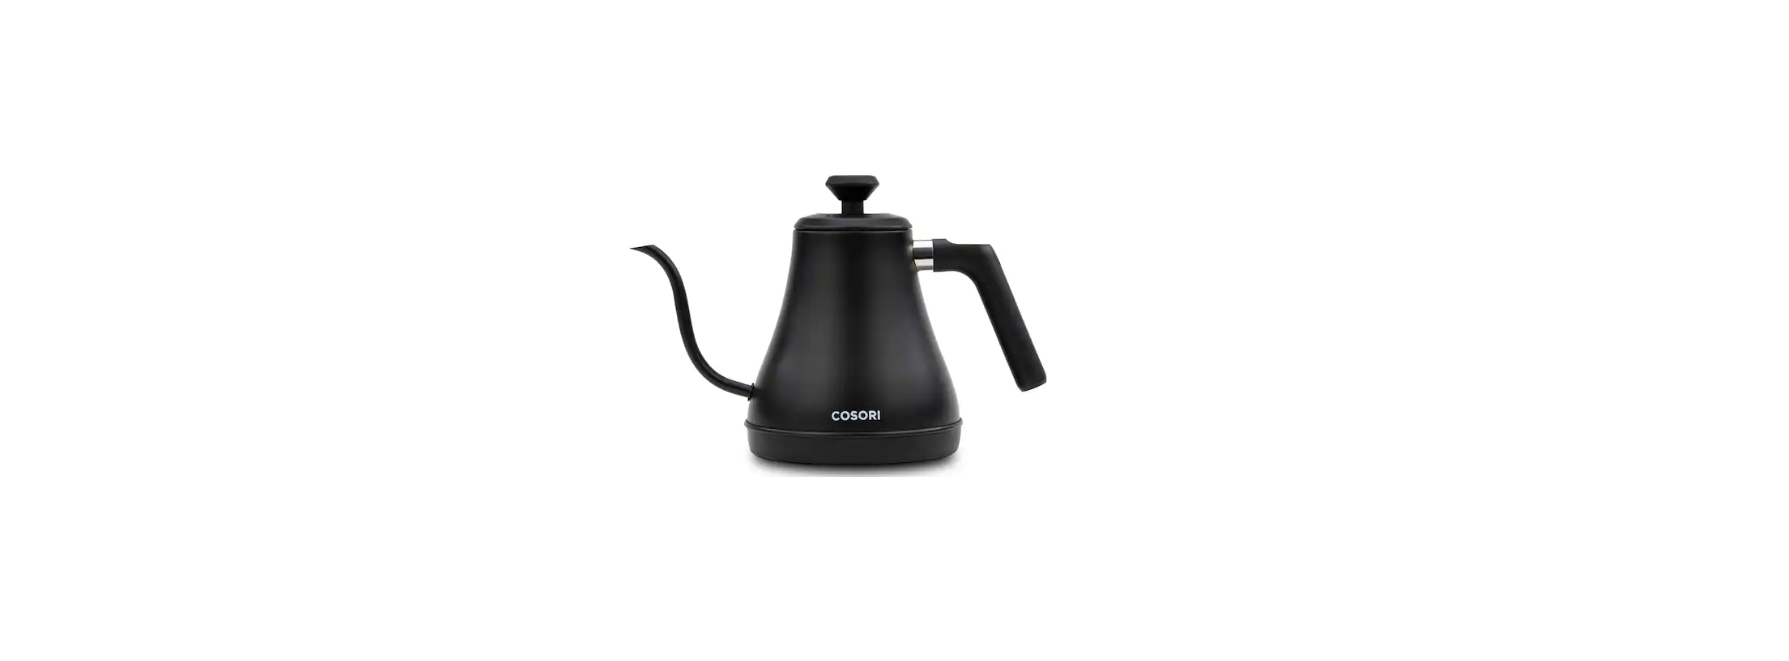 You are currently viewing Cosori CS108-NK Electric Gooseneck Kettle User Manual